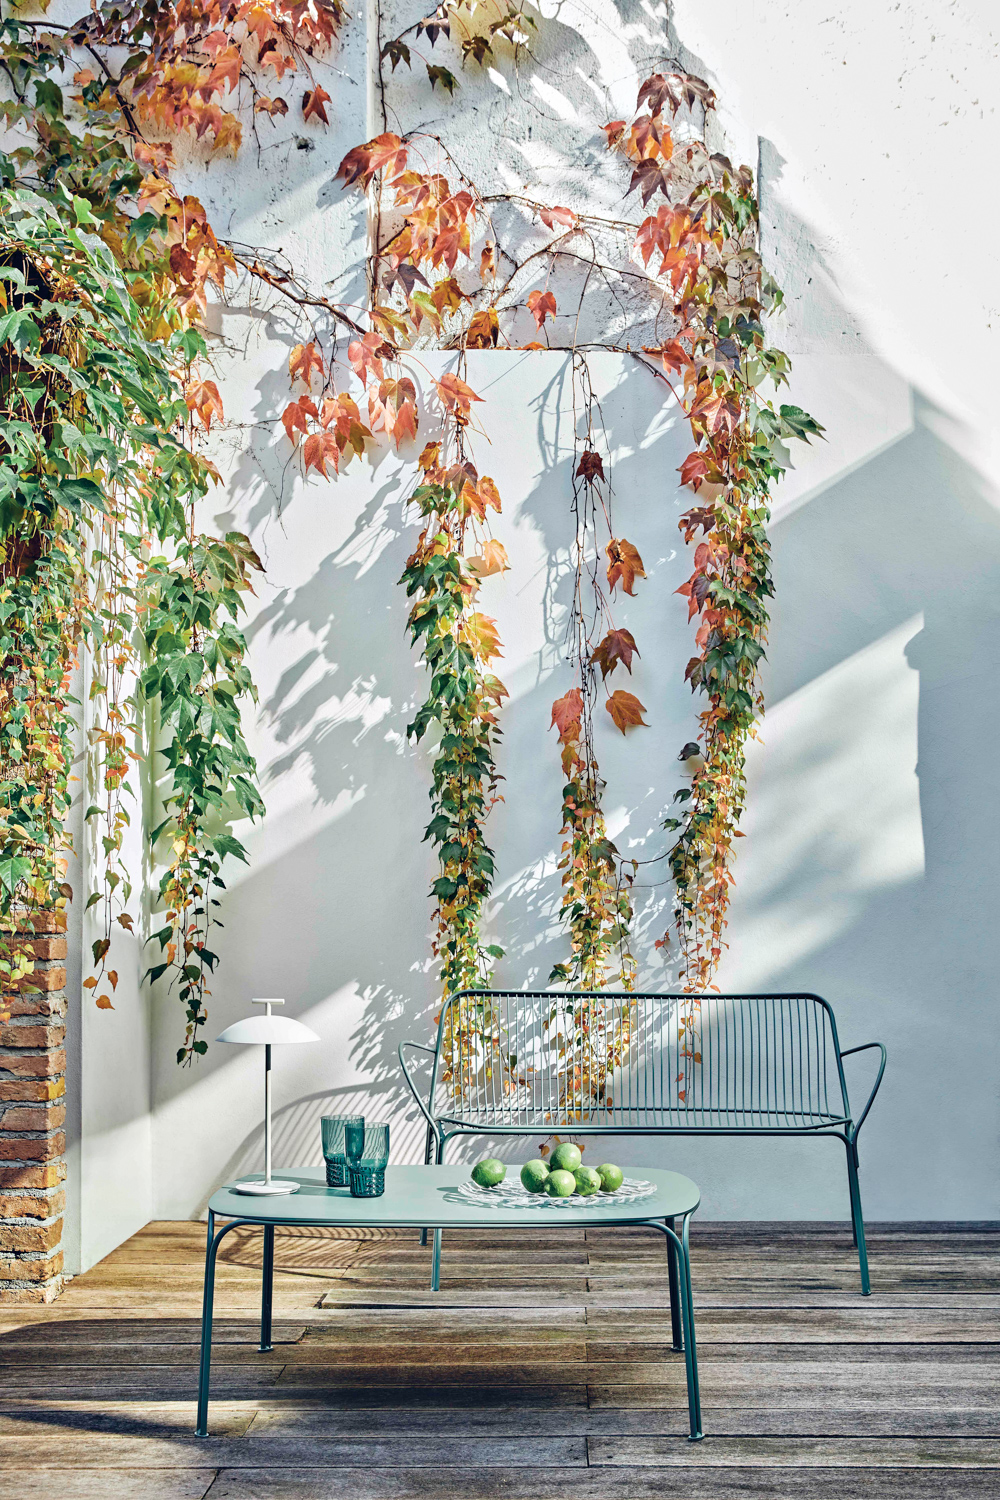 South Florida shop Kartell displays an outdoor couch and table against a white wall